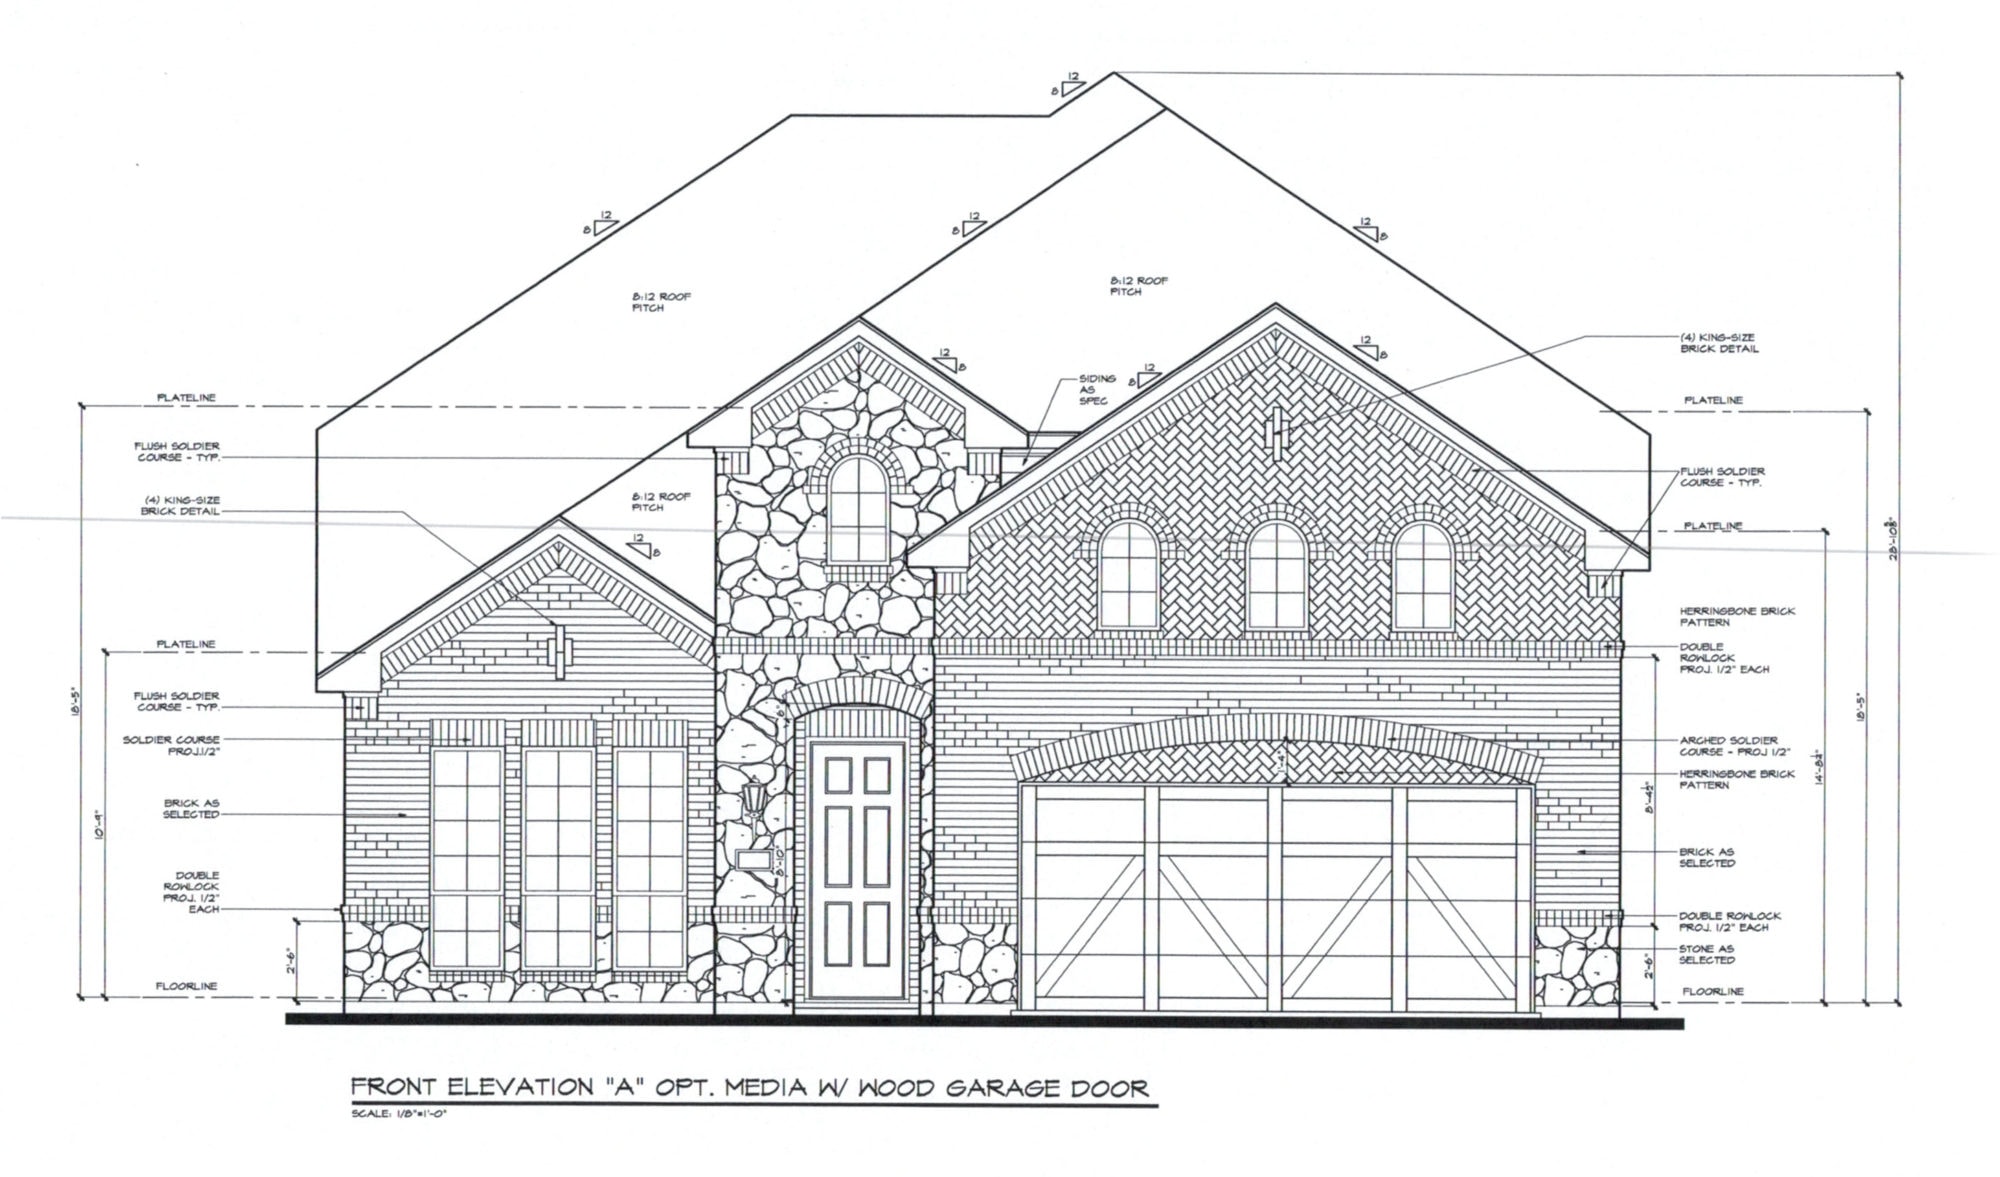 Struggling with how to choose brick for your home? This exterior house plan is beautiful! Love these brick selections for this exterior brick home being built. #exterior #homeexterior #homebuild